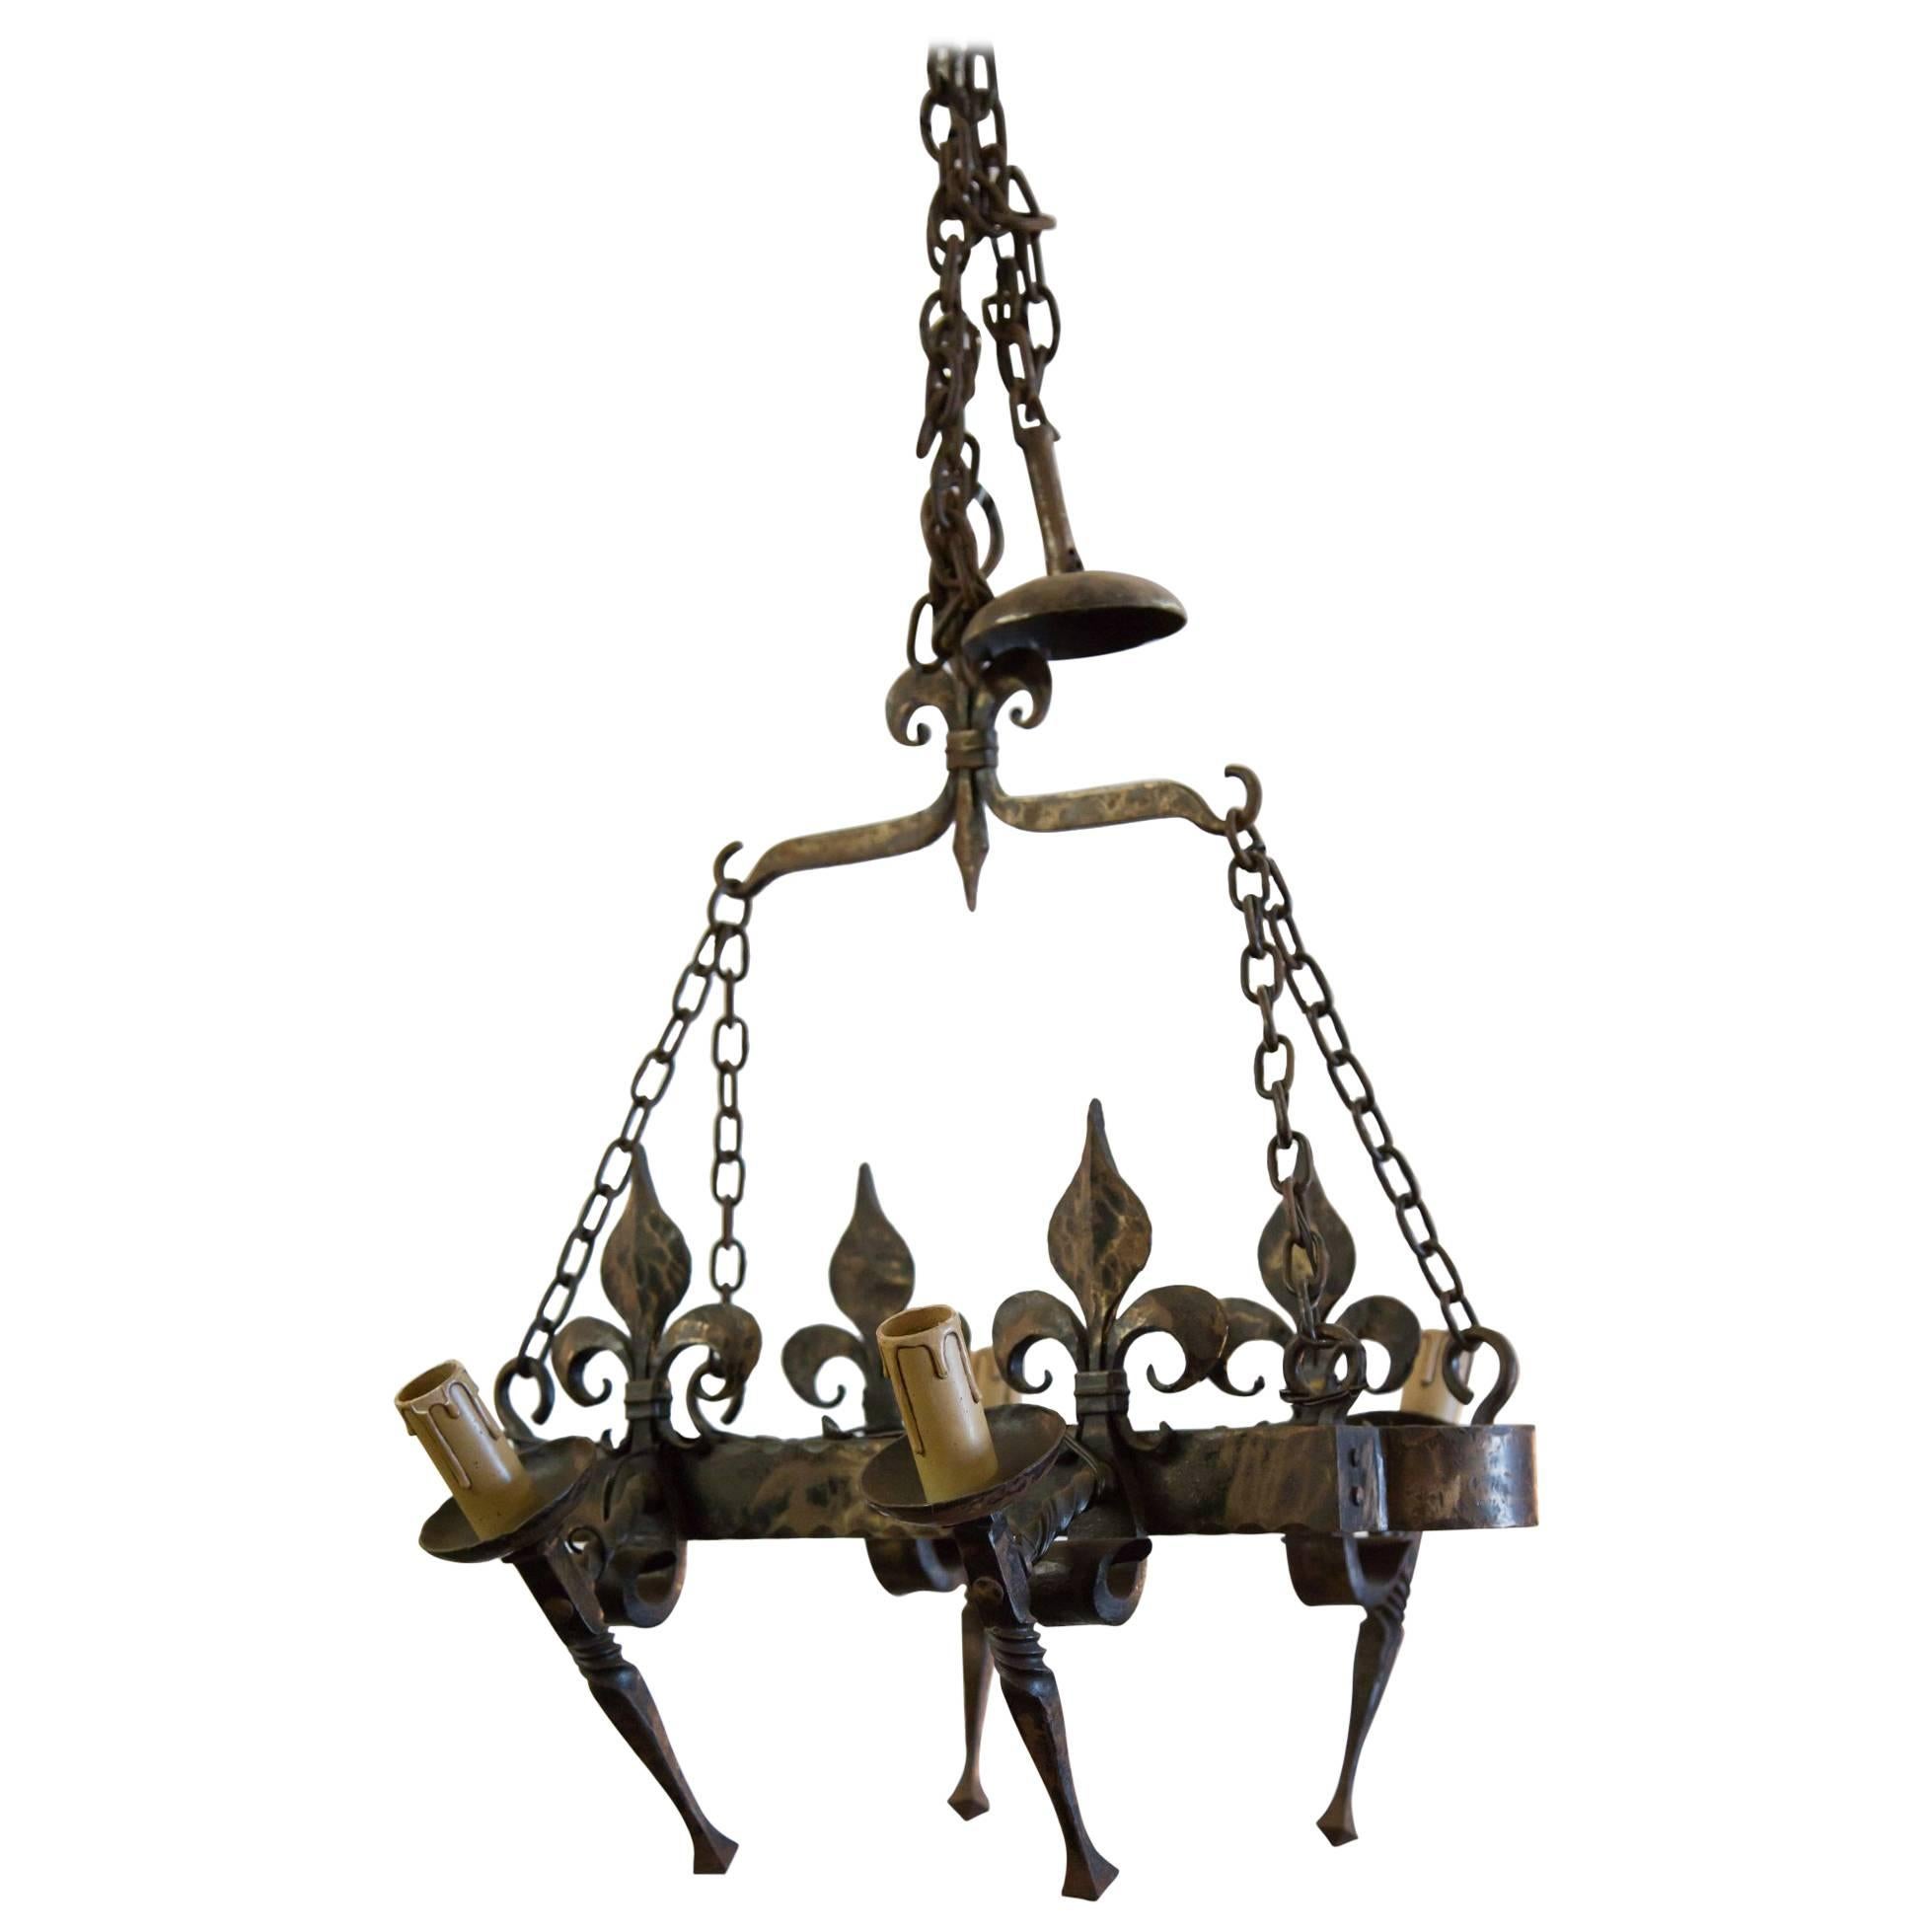 Country French Four Light Hand-Forged Iron Fleur de Lis Chandelier